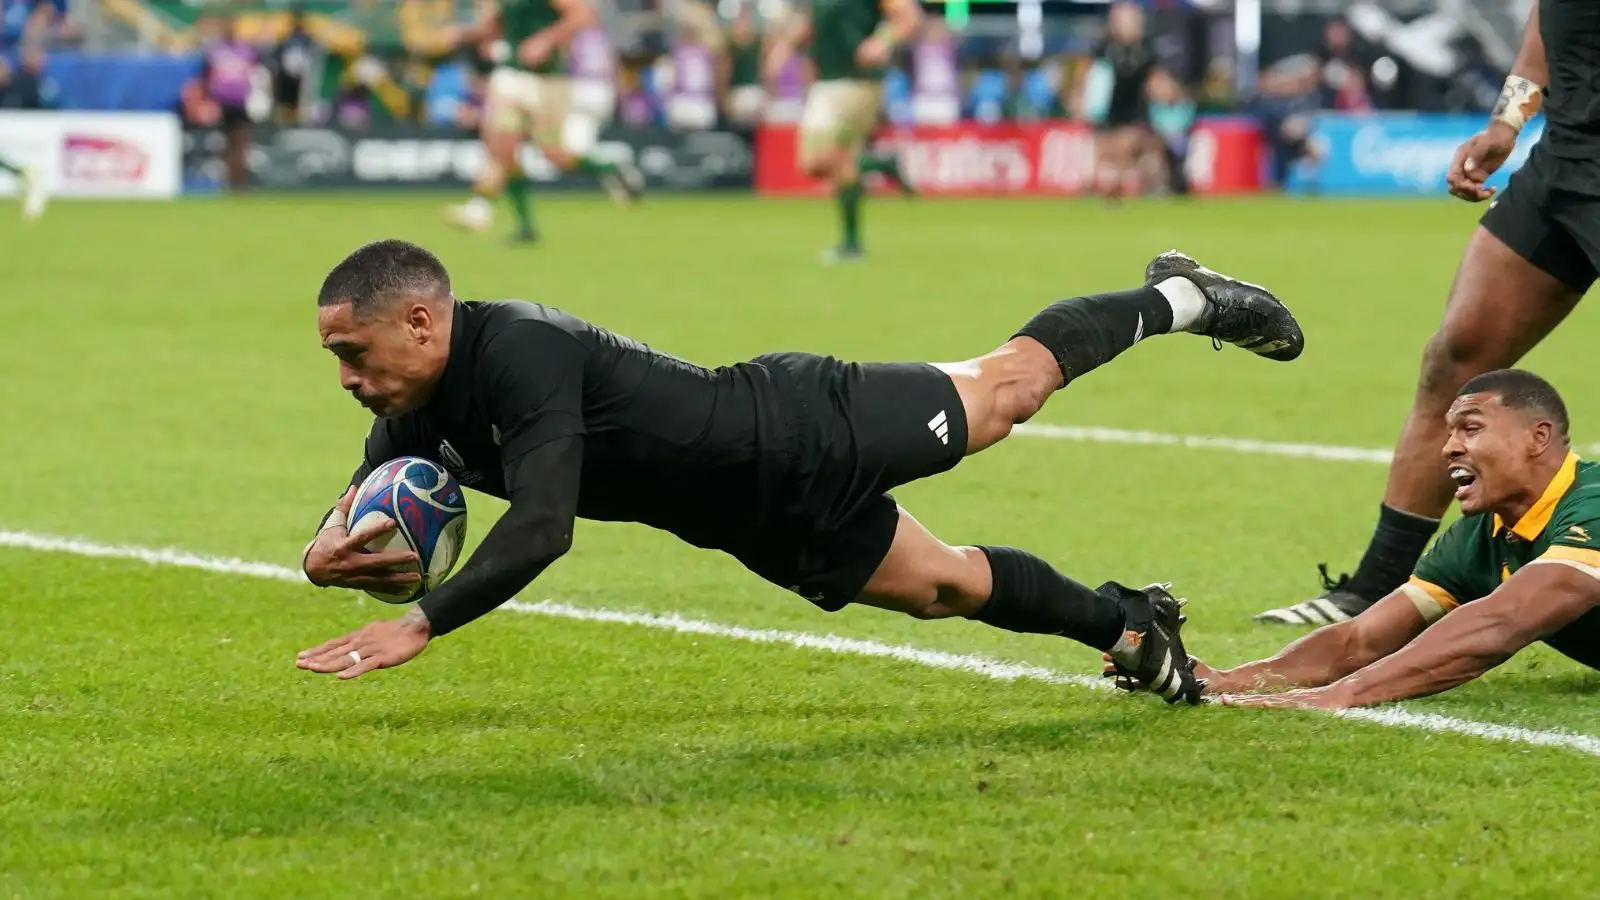 All Blacks' scrumhalf Aaron Smith scores a try which is ruled out for a knock-on following a TMO review during the Rugby World Cup 2023 final match between New Zealand and South Africa at the Stade de France in Paris.